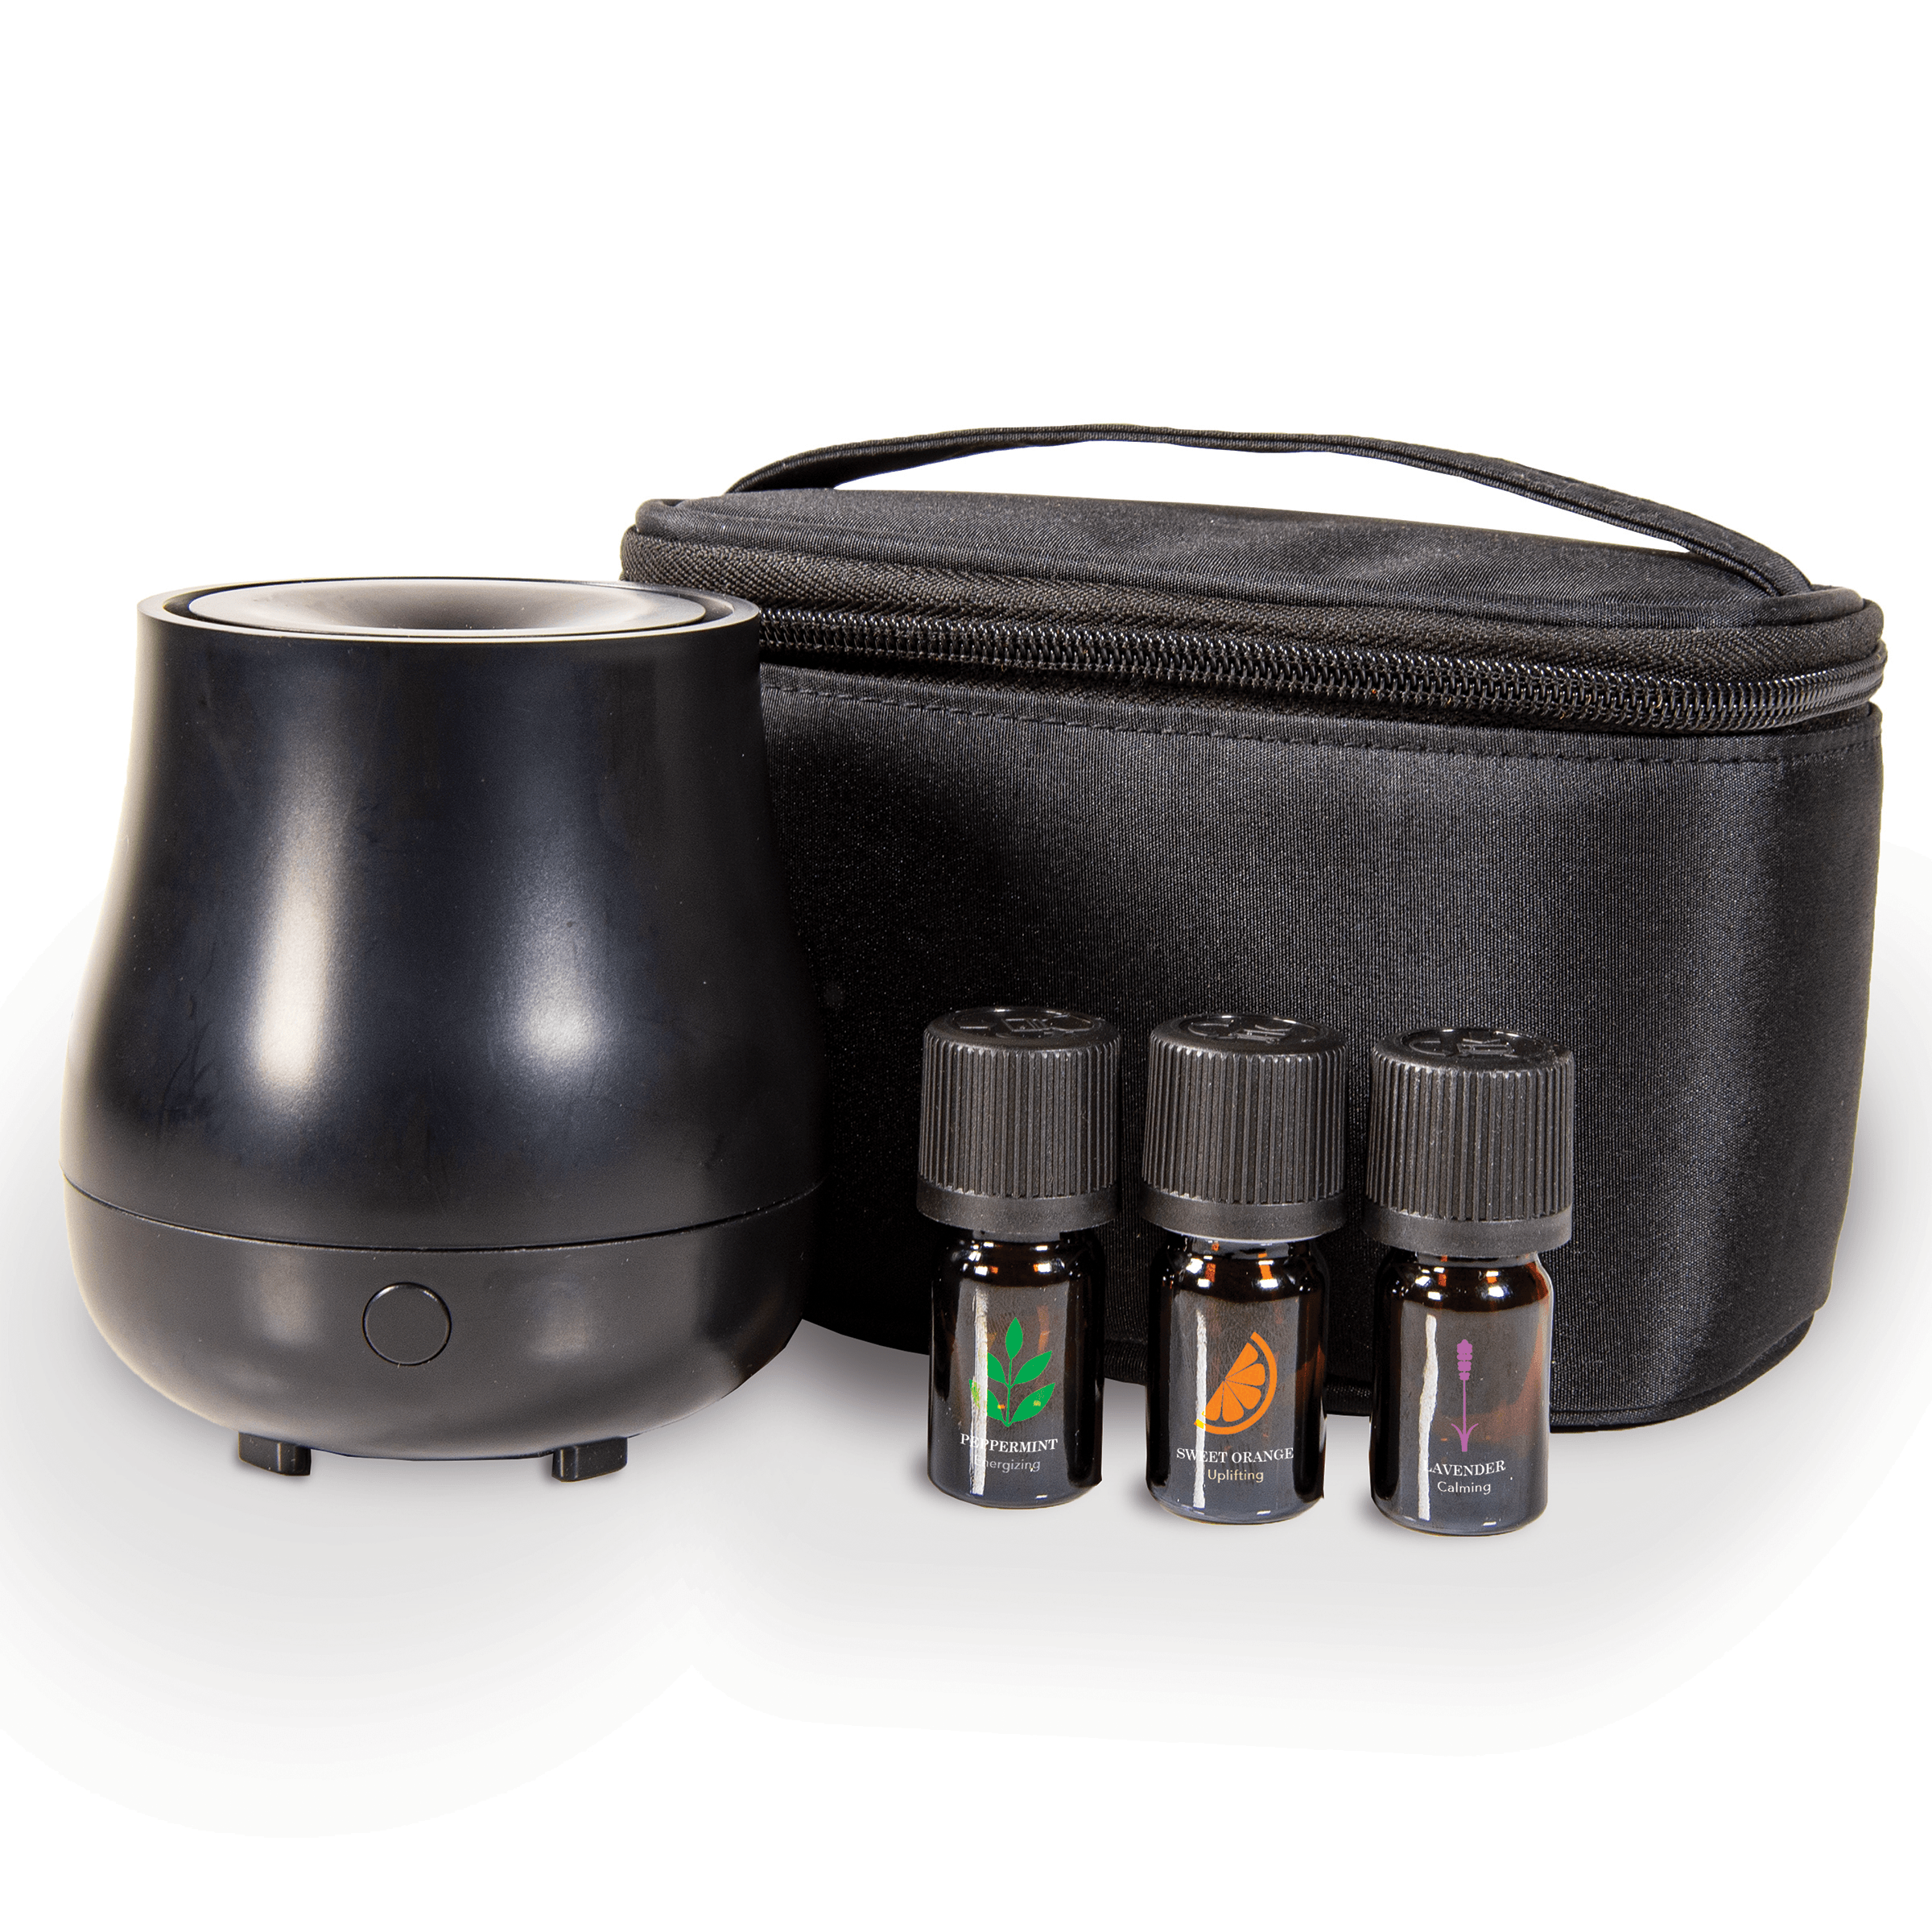 ScentSationals Aromatherapy Oil Diffuser Gift Set, Black - image 1 of 10